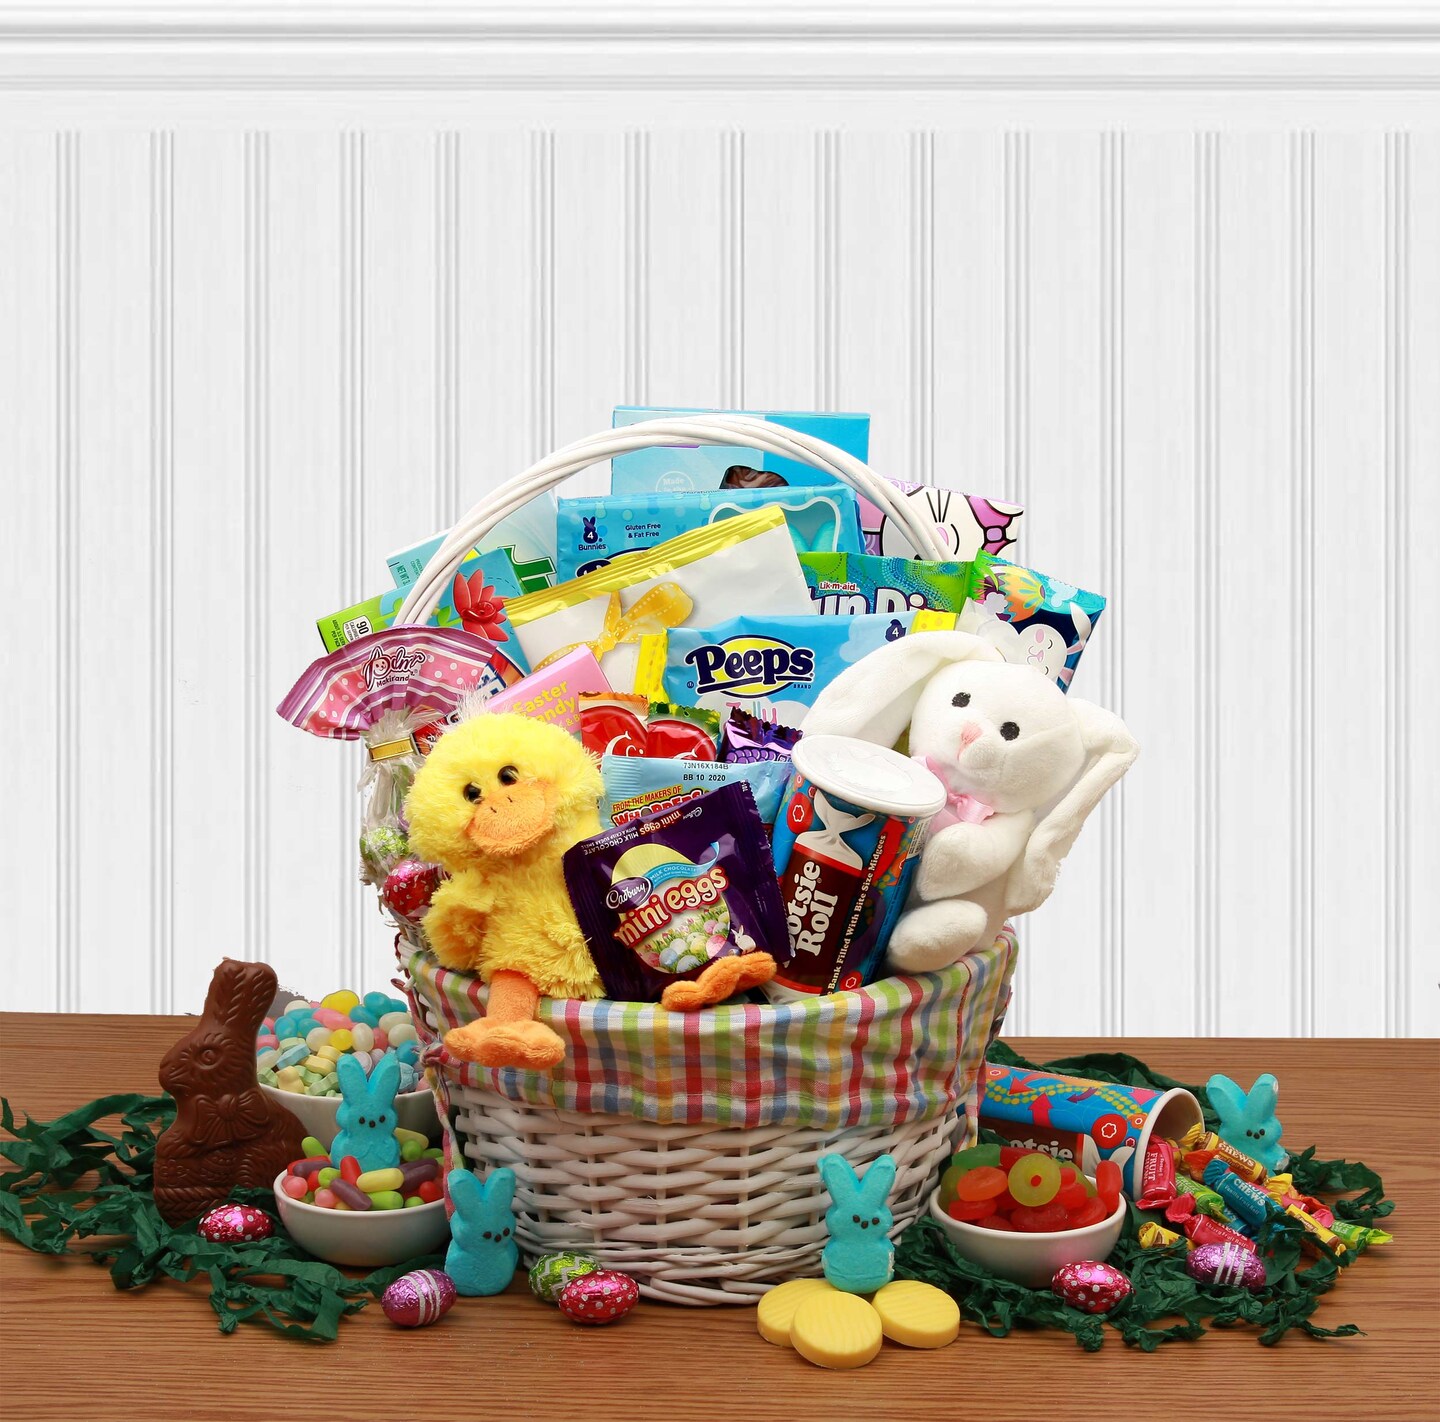 GBDS Easter Gift Basket - An Easter Classic Easter Goodie Gift Basket